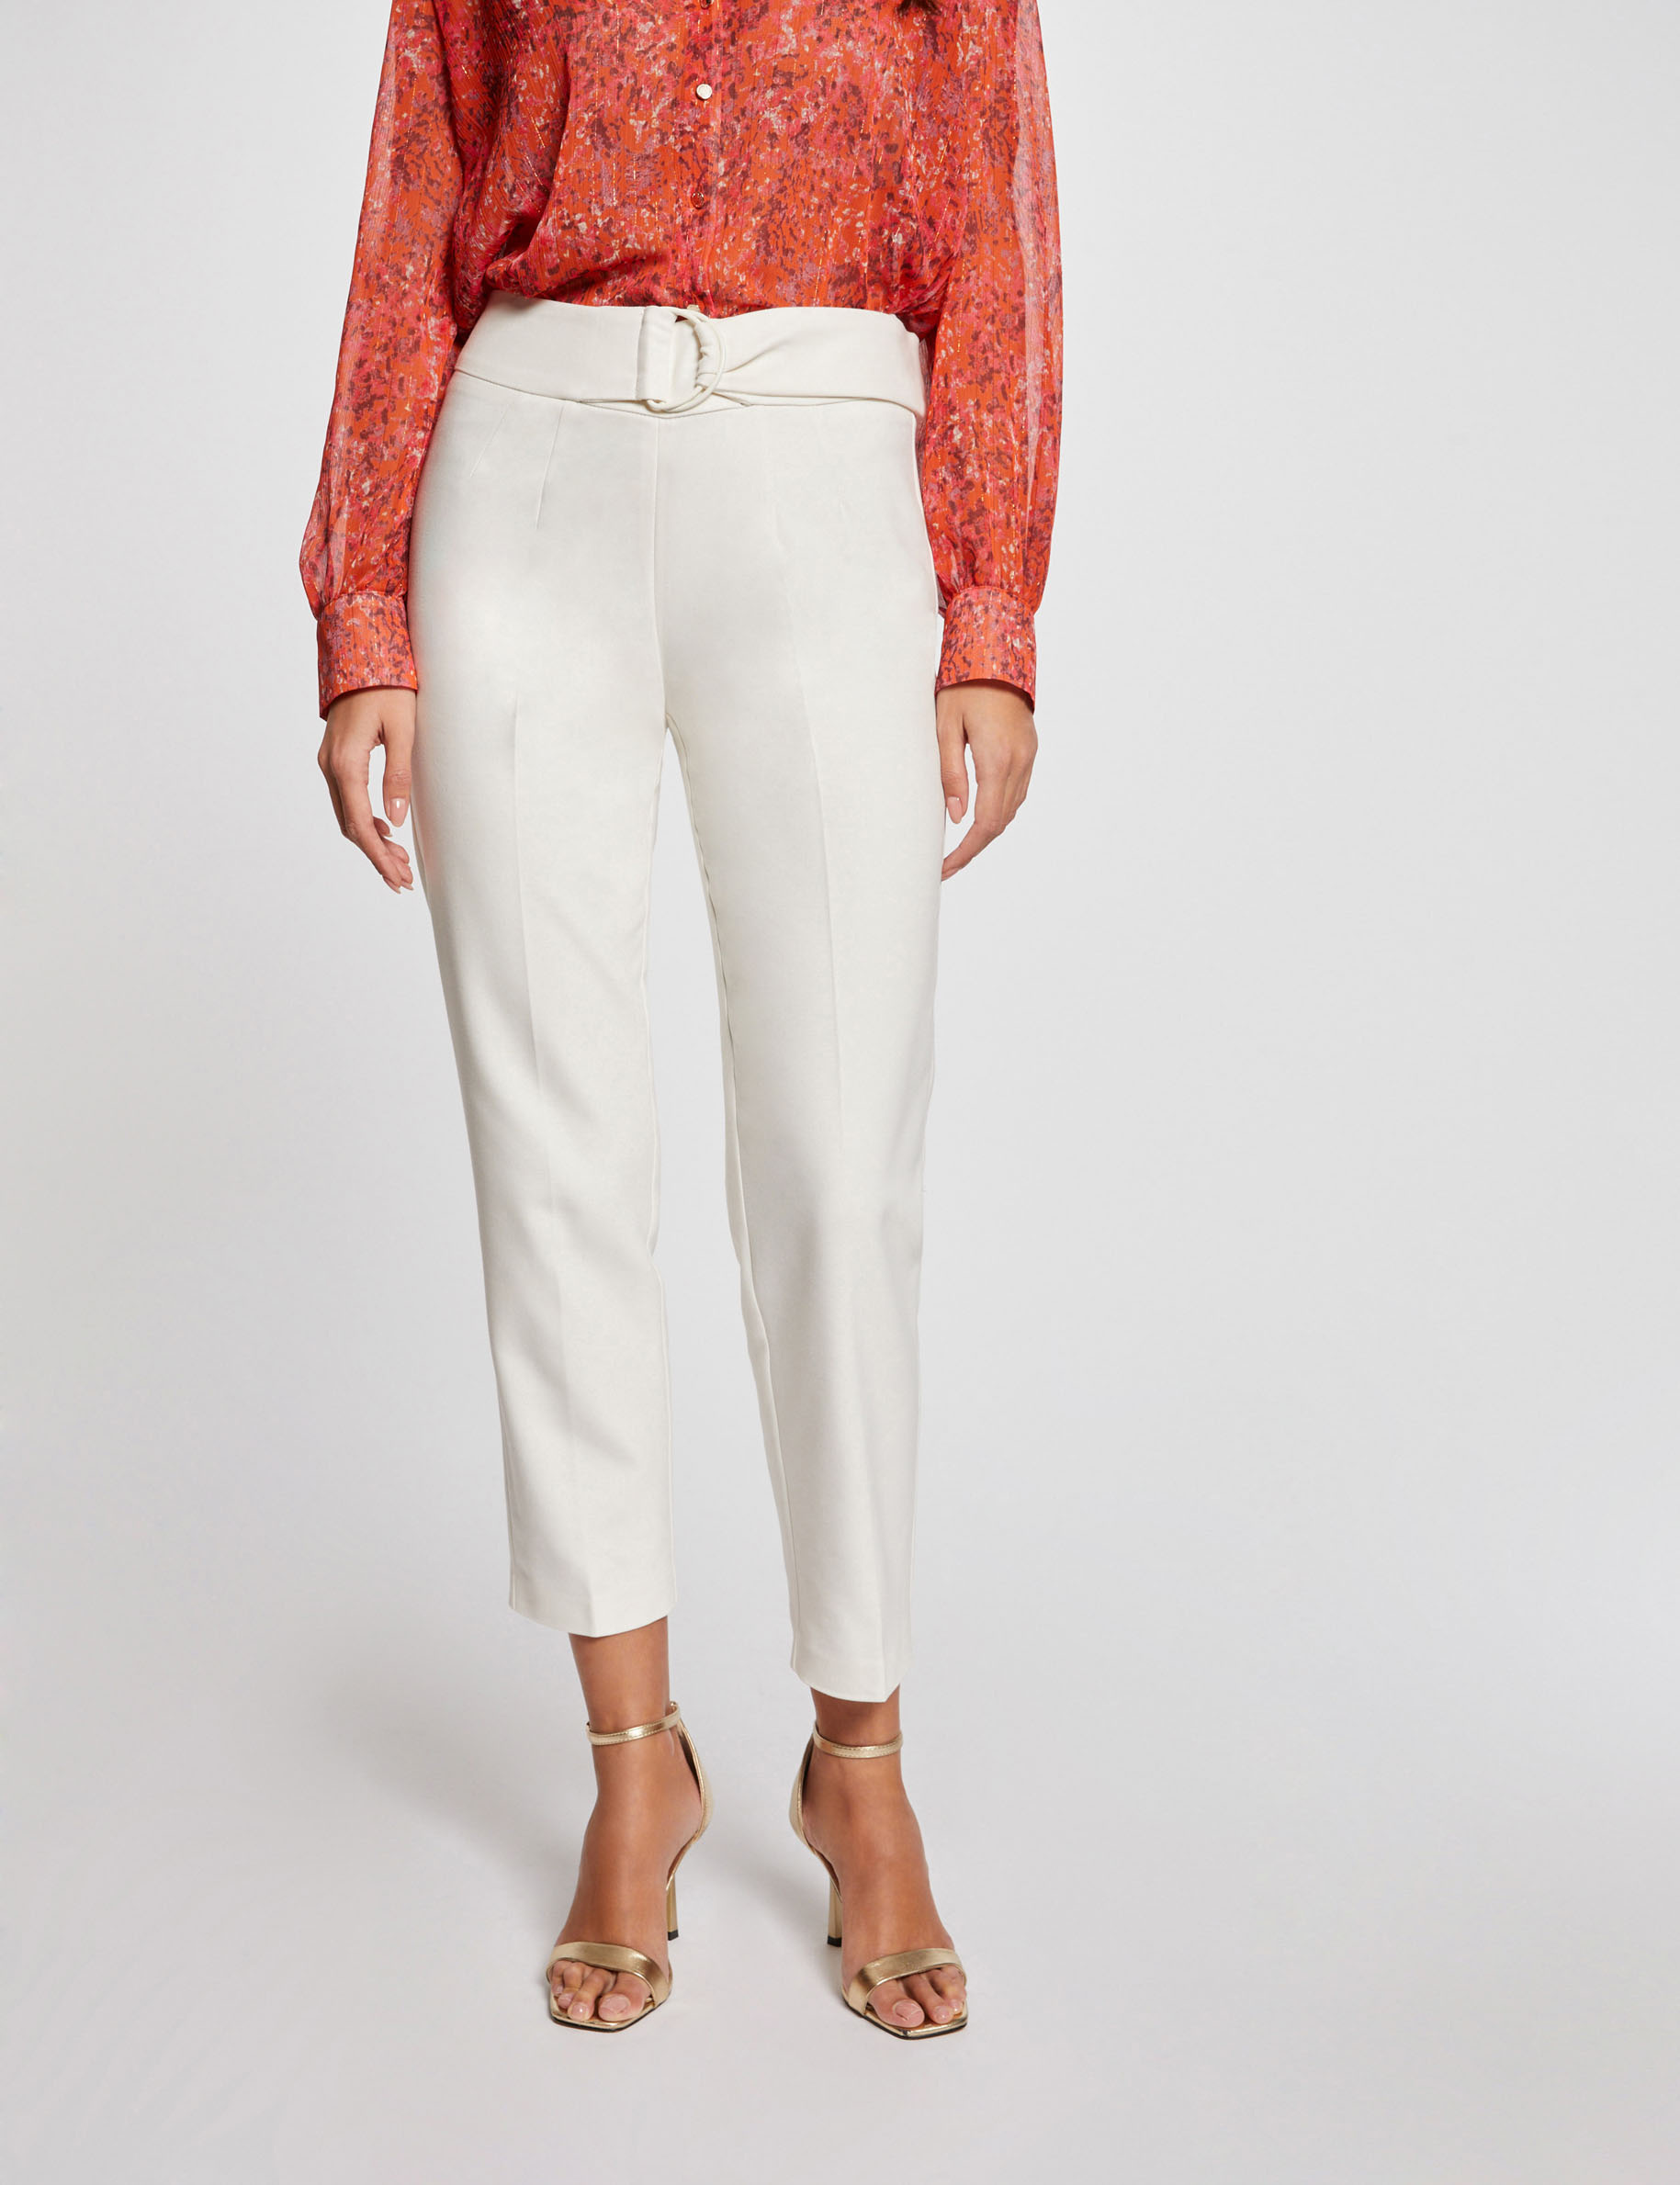 High waist fitted trousers ivory ladies'